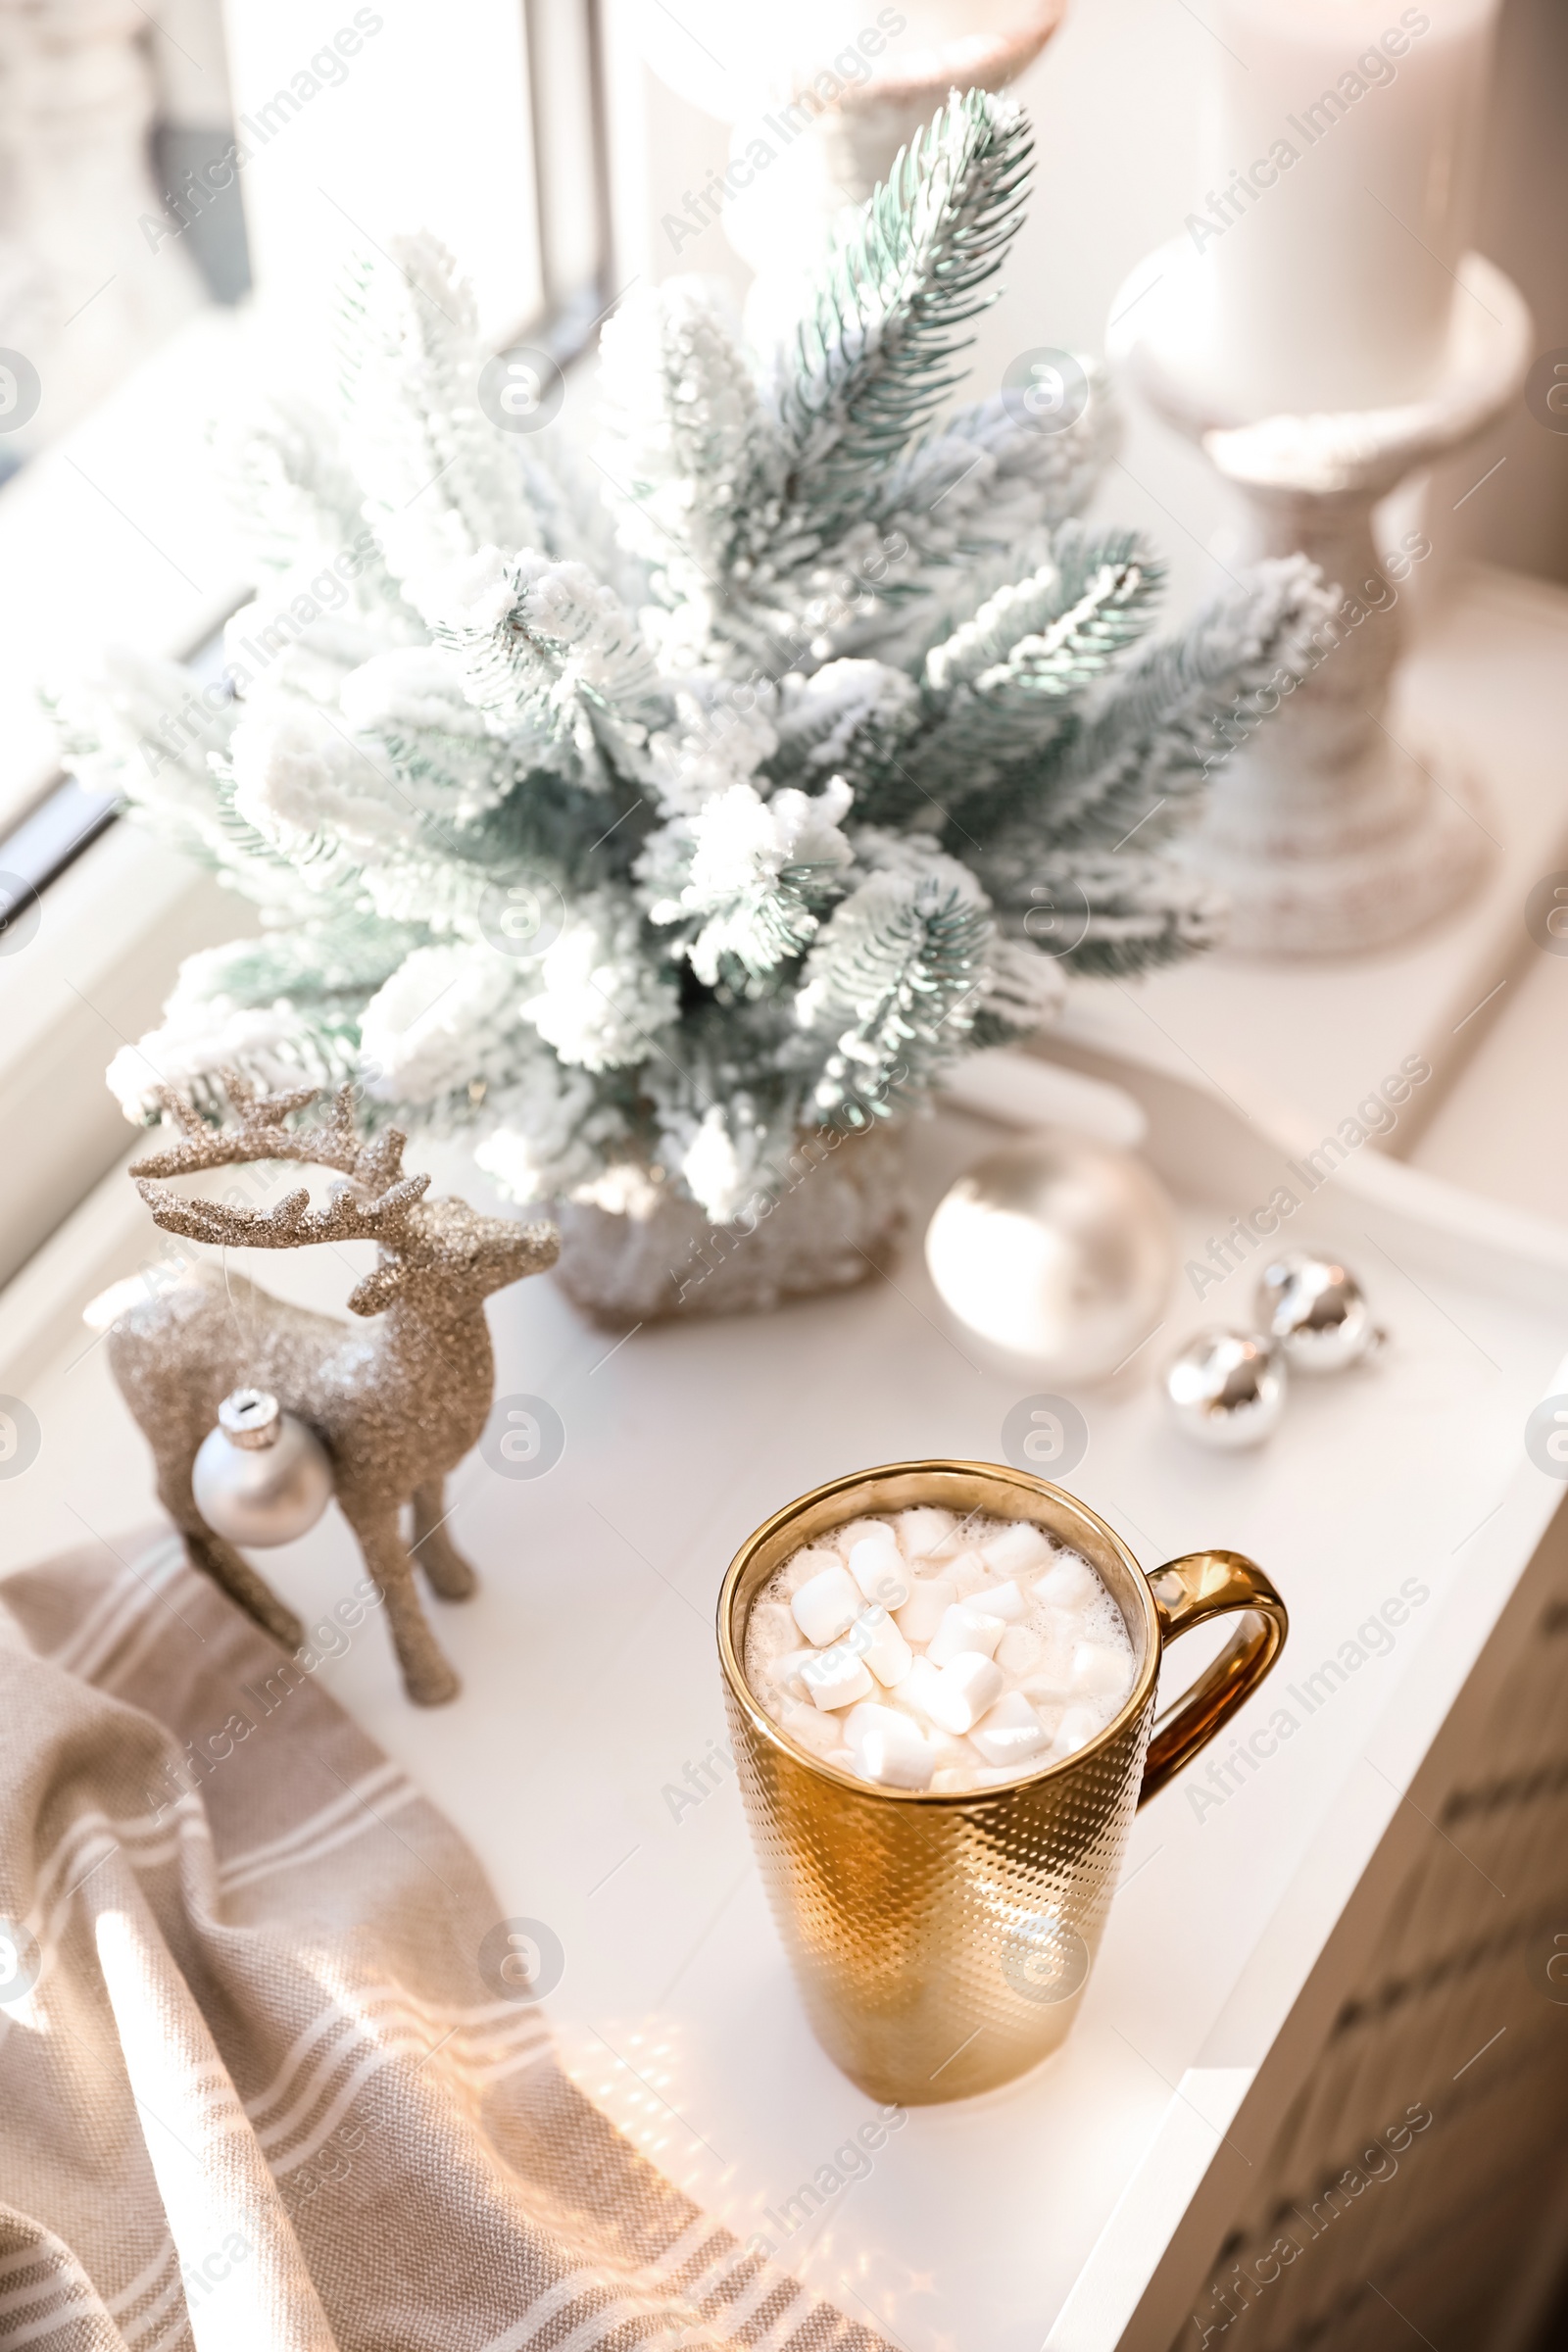 Photo of Golden cup of cocoa and Christmas decor on window sill indoors